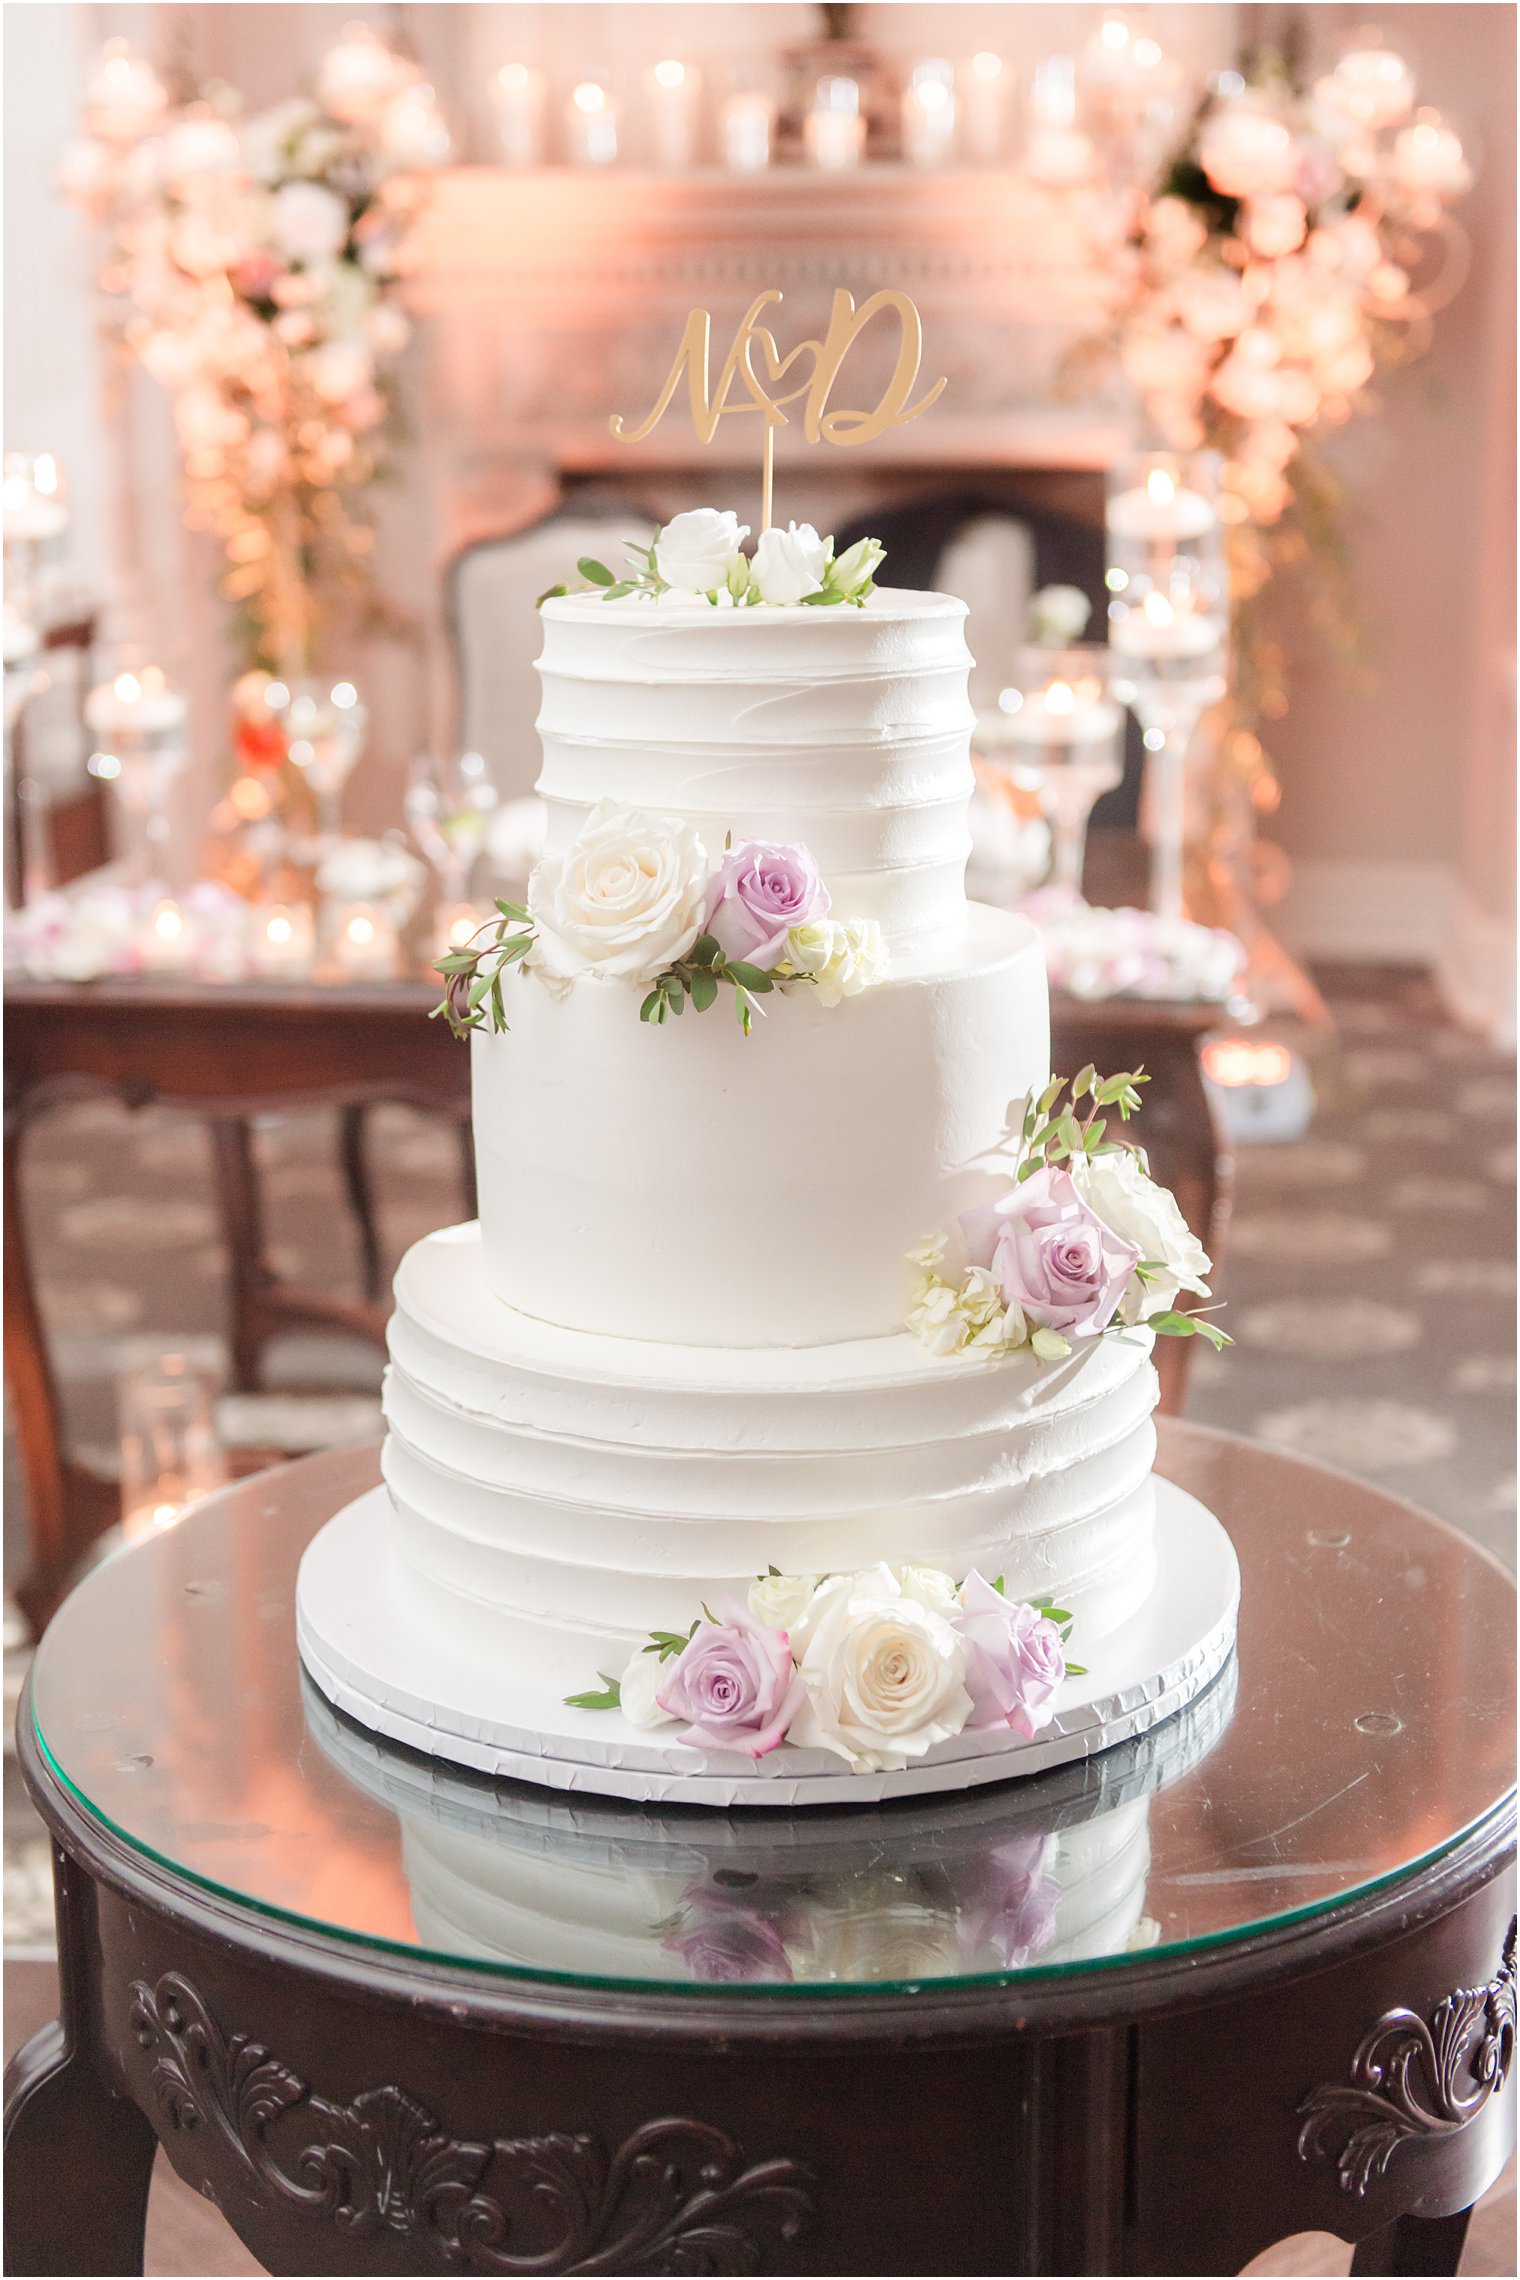 tiered wedding cake with purple and ivory roses 